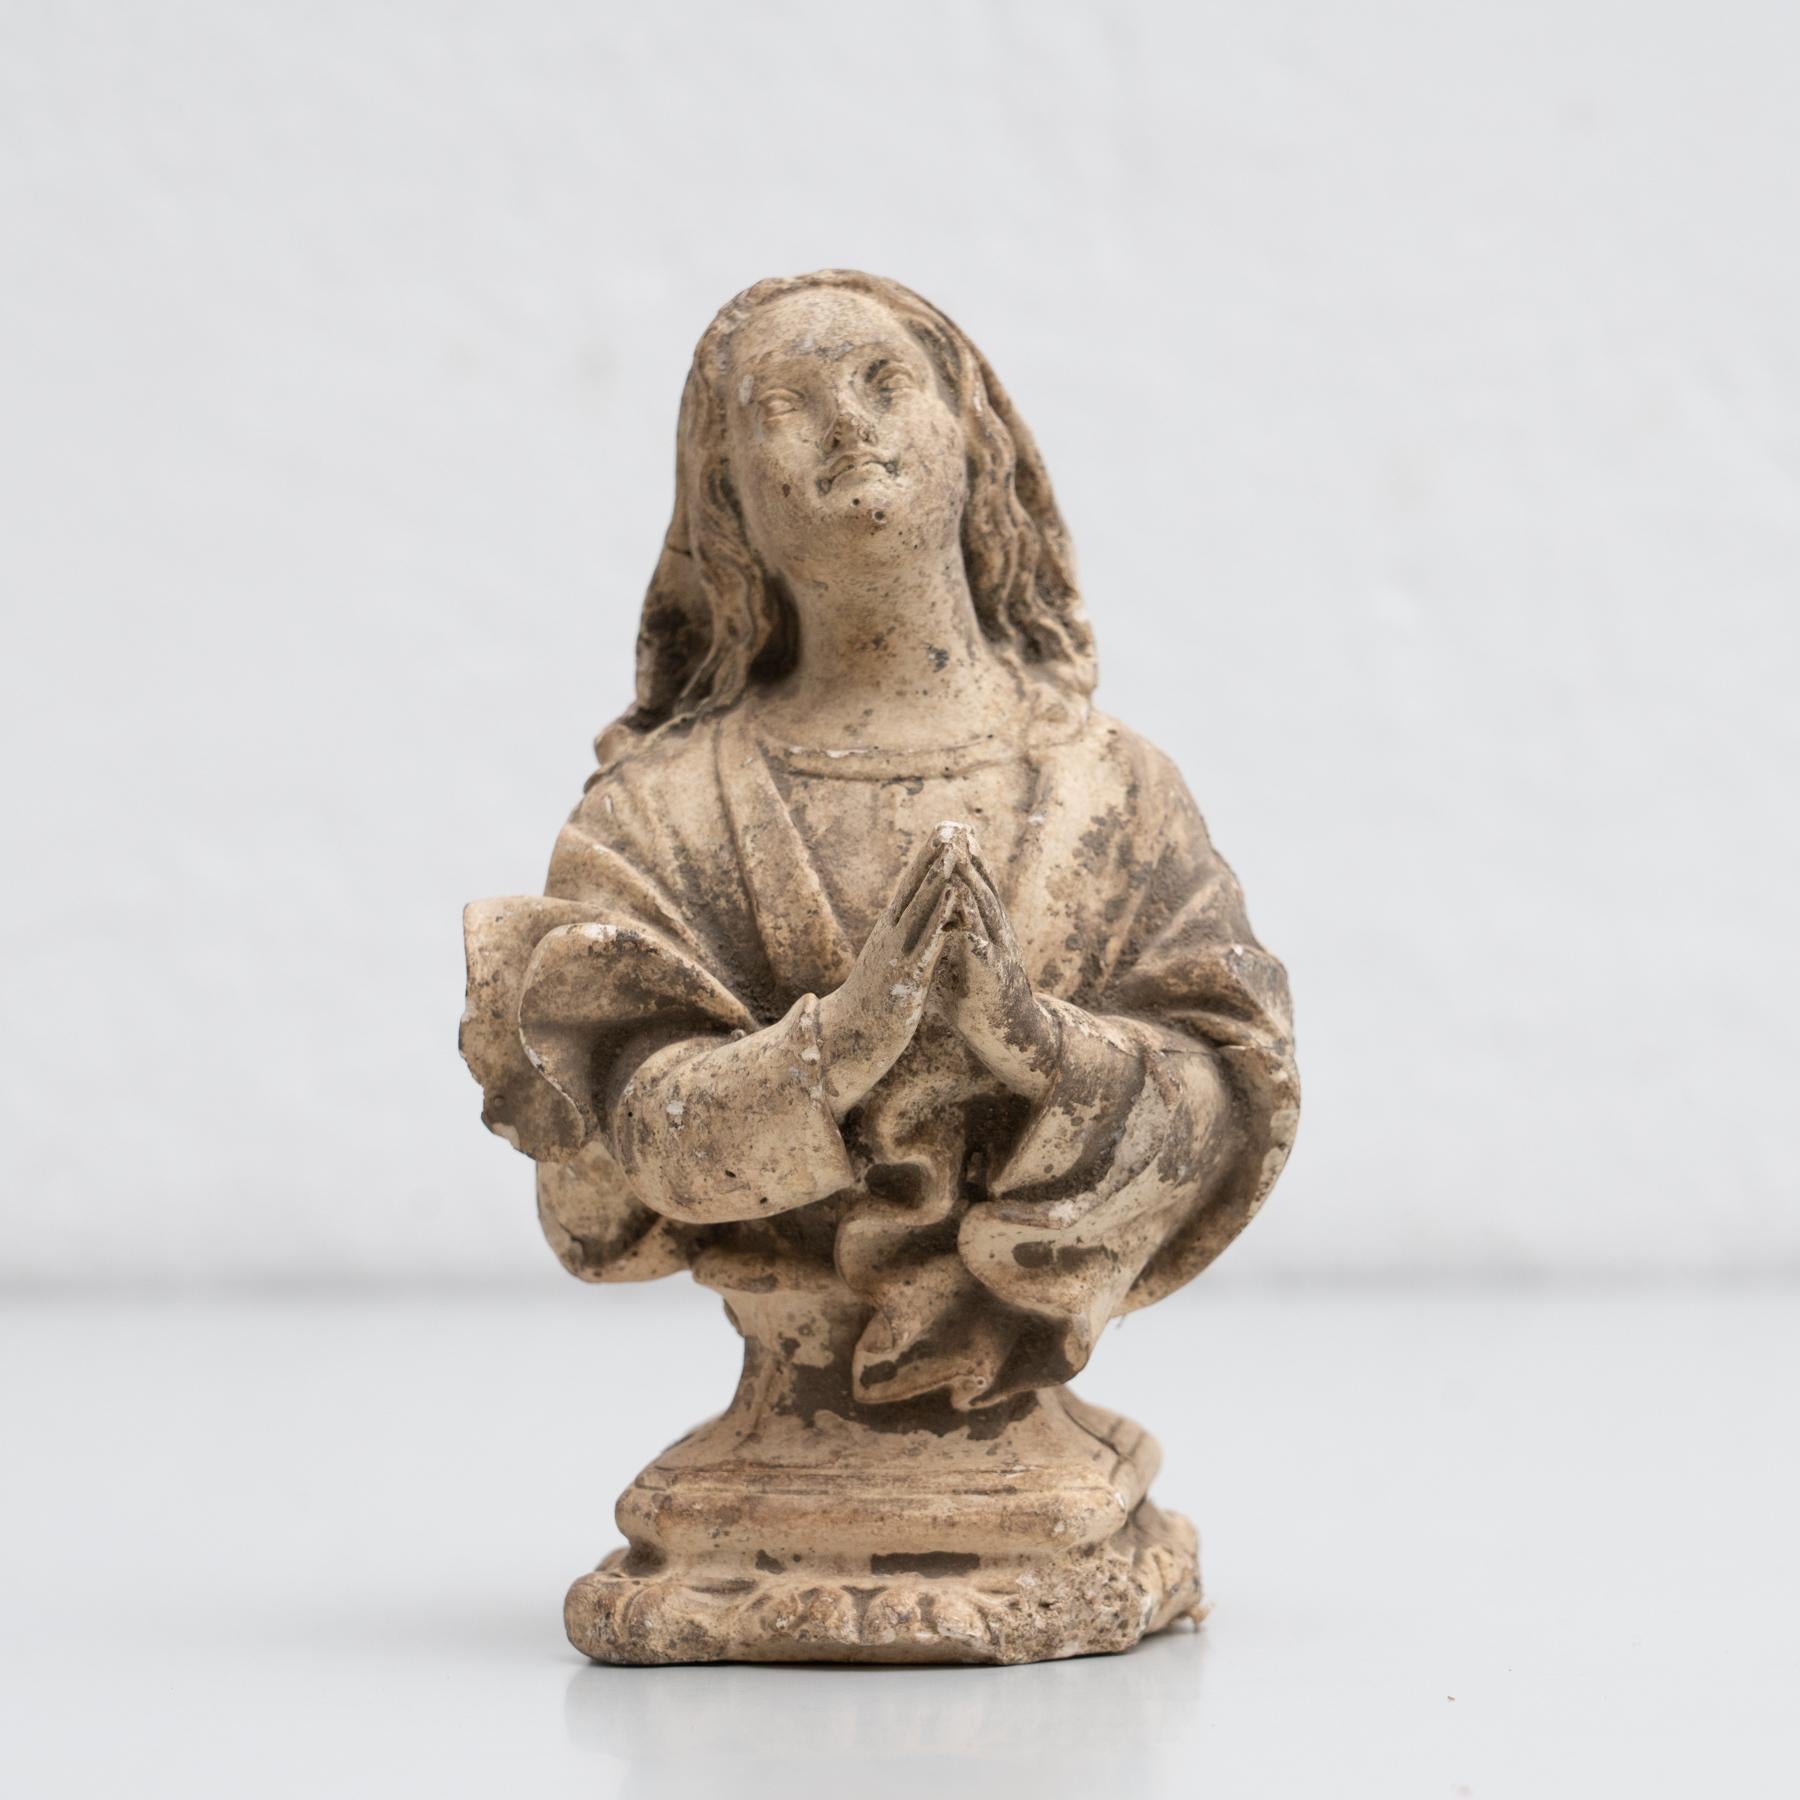 Traditional religious plaster figure of a praying woman.

Made in traditional Catalan atelier in Olot, Spain, circa 1950.

In original condition, with minor wear consistent with age and use, preserving a beautiful patina.

Olot has a long